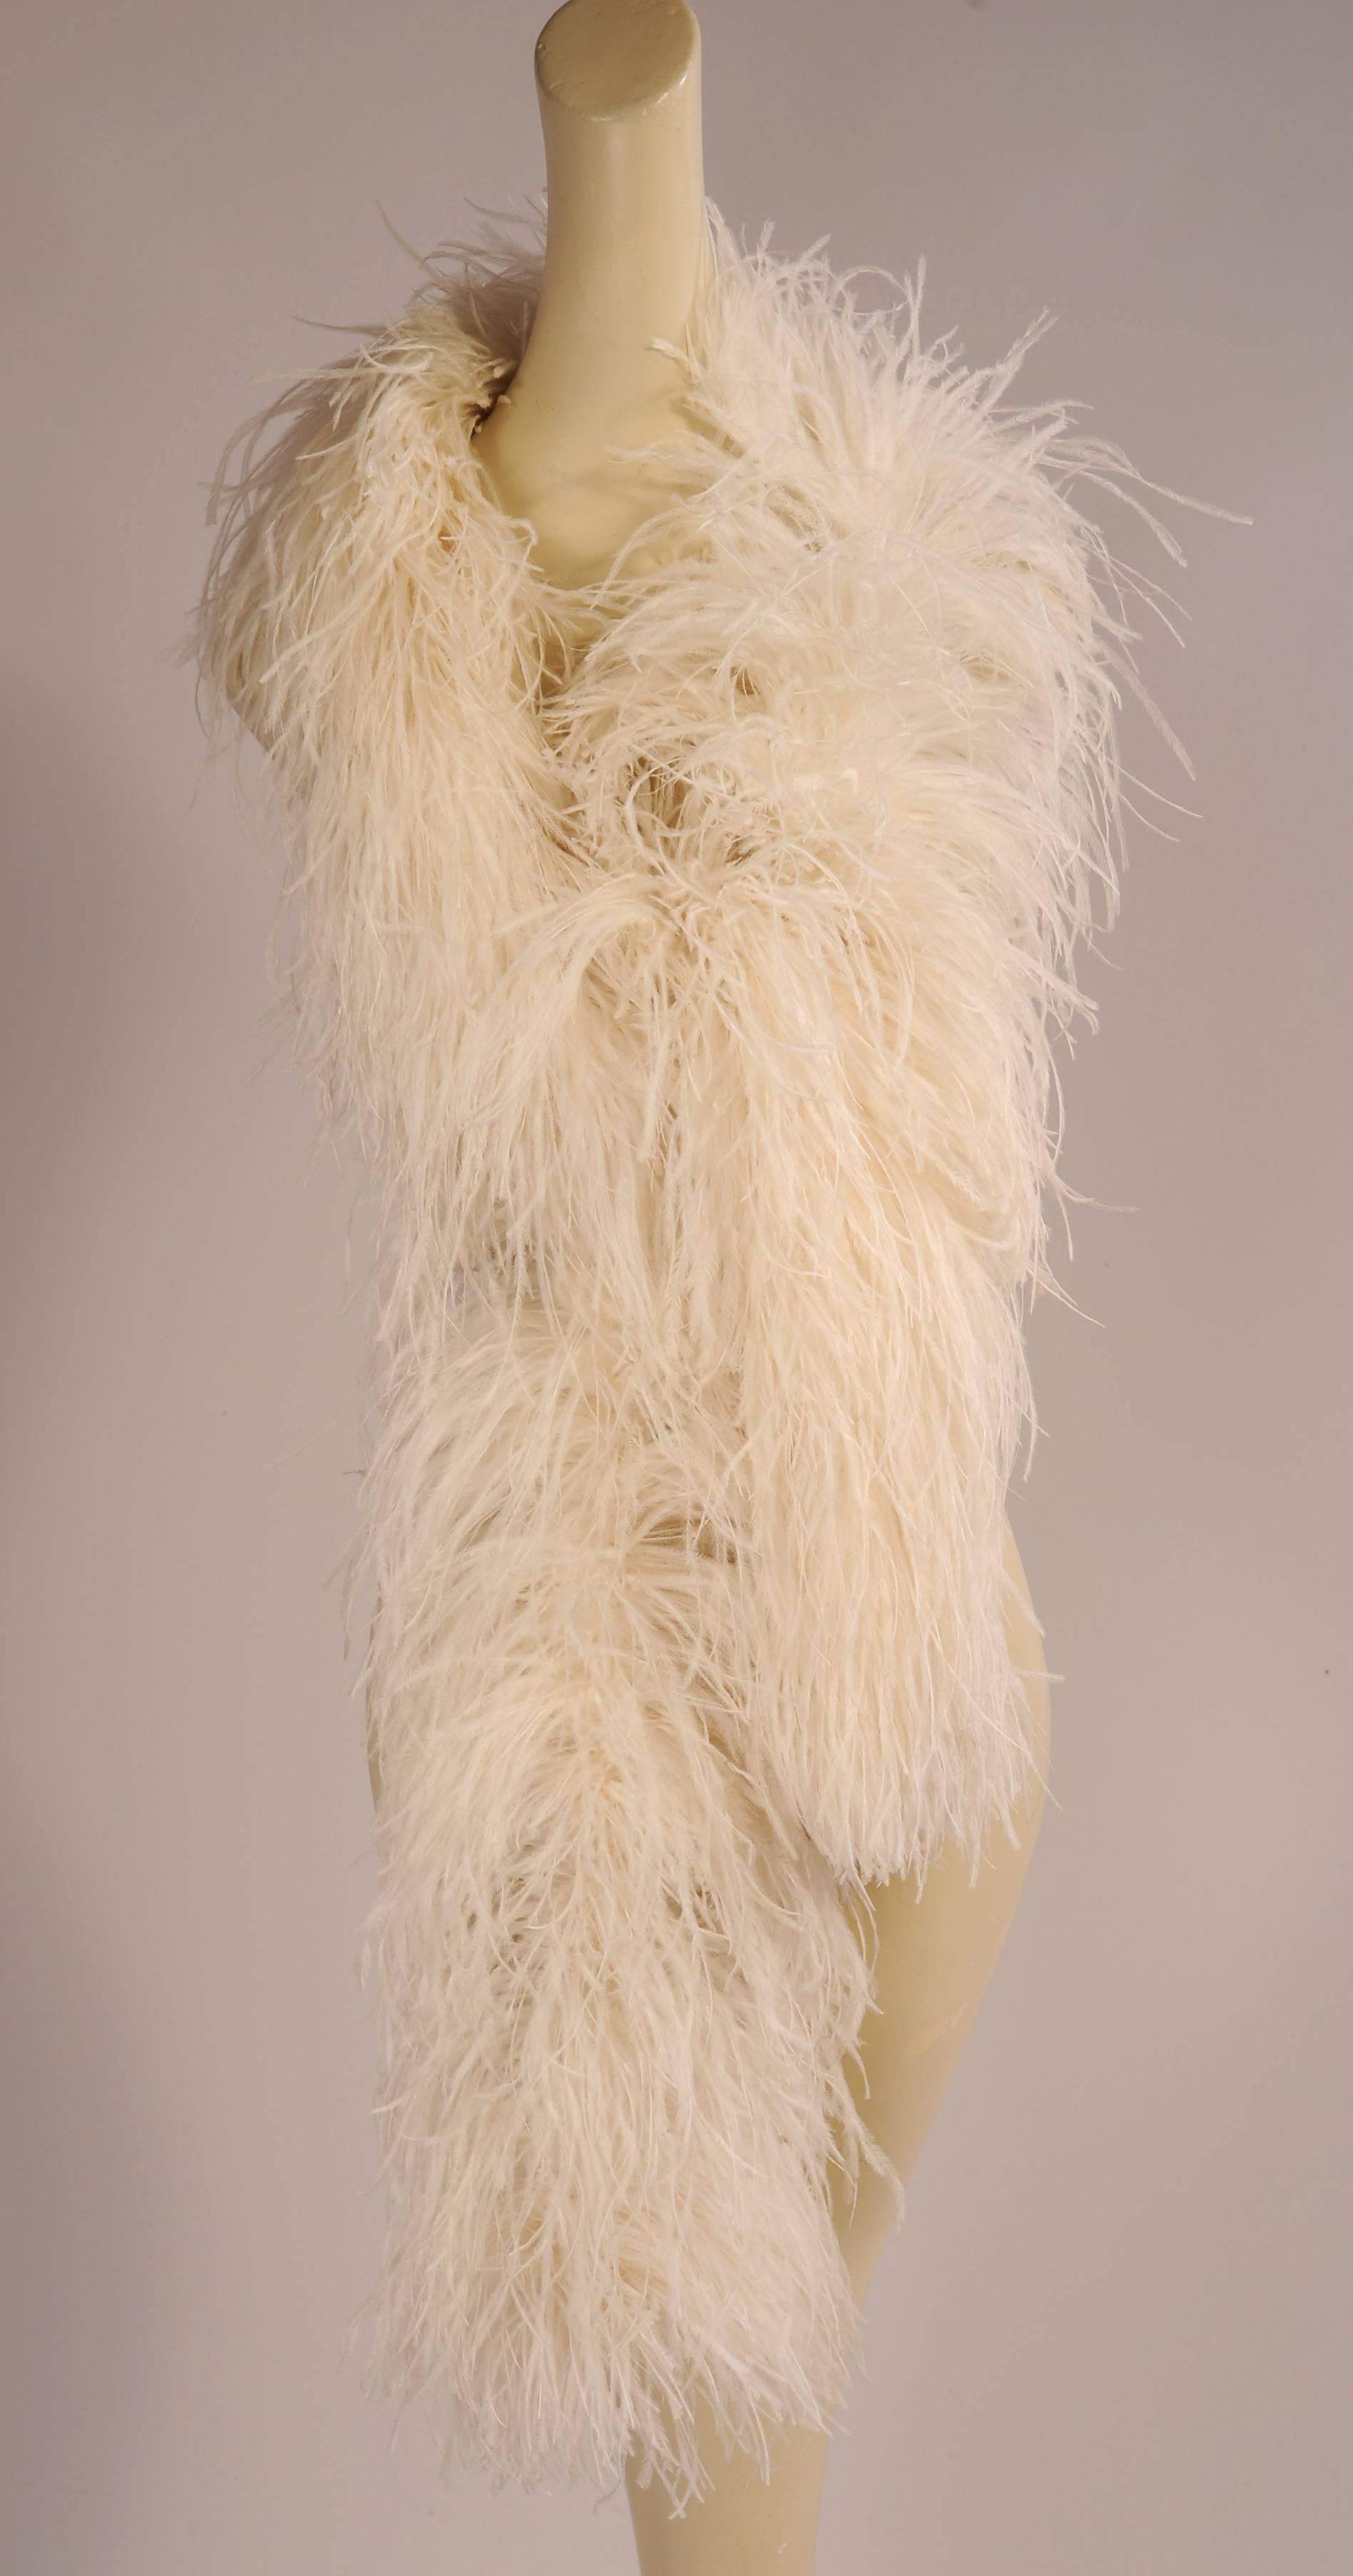 An estate find this long and luxurious bright white ostrich feather boa is in excellent condition.